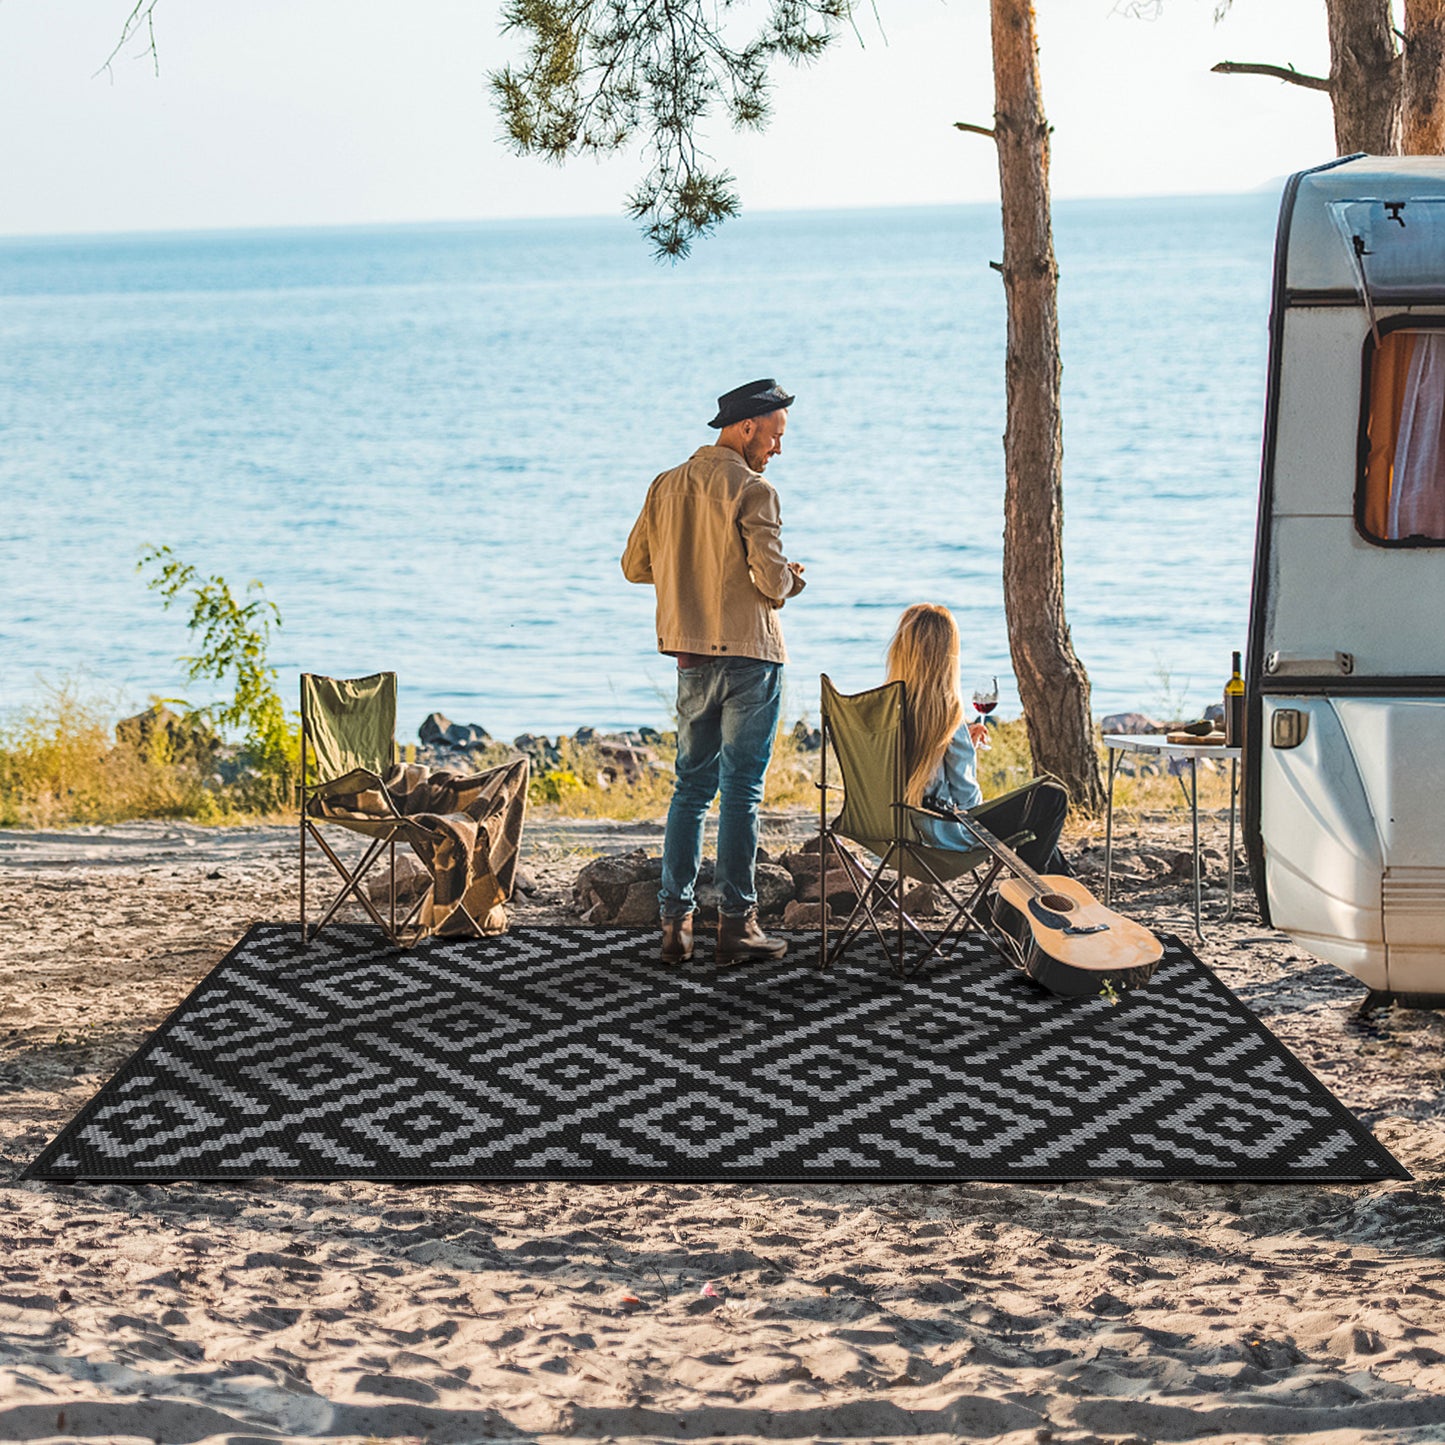 GENIMO Outdoor Rug for Patio Clearance, Waterproof Mat,Reversible Plastic Camping Rugs,Rv,Porch,Deck,Camper,Balcony,Backyard